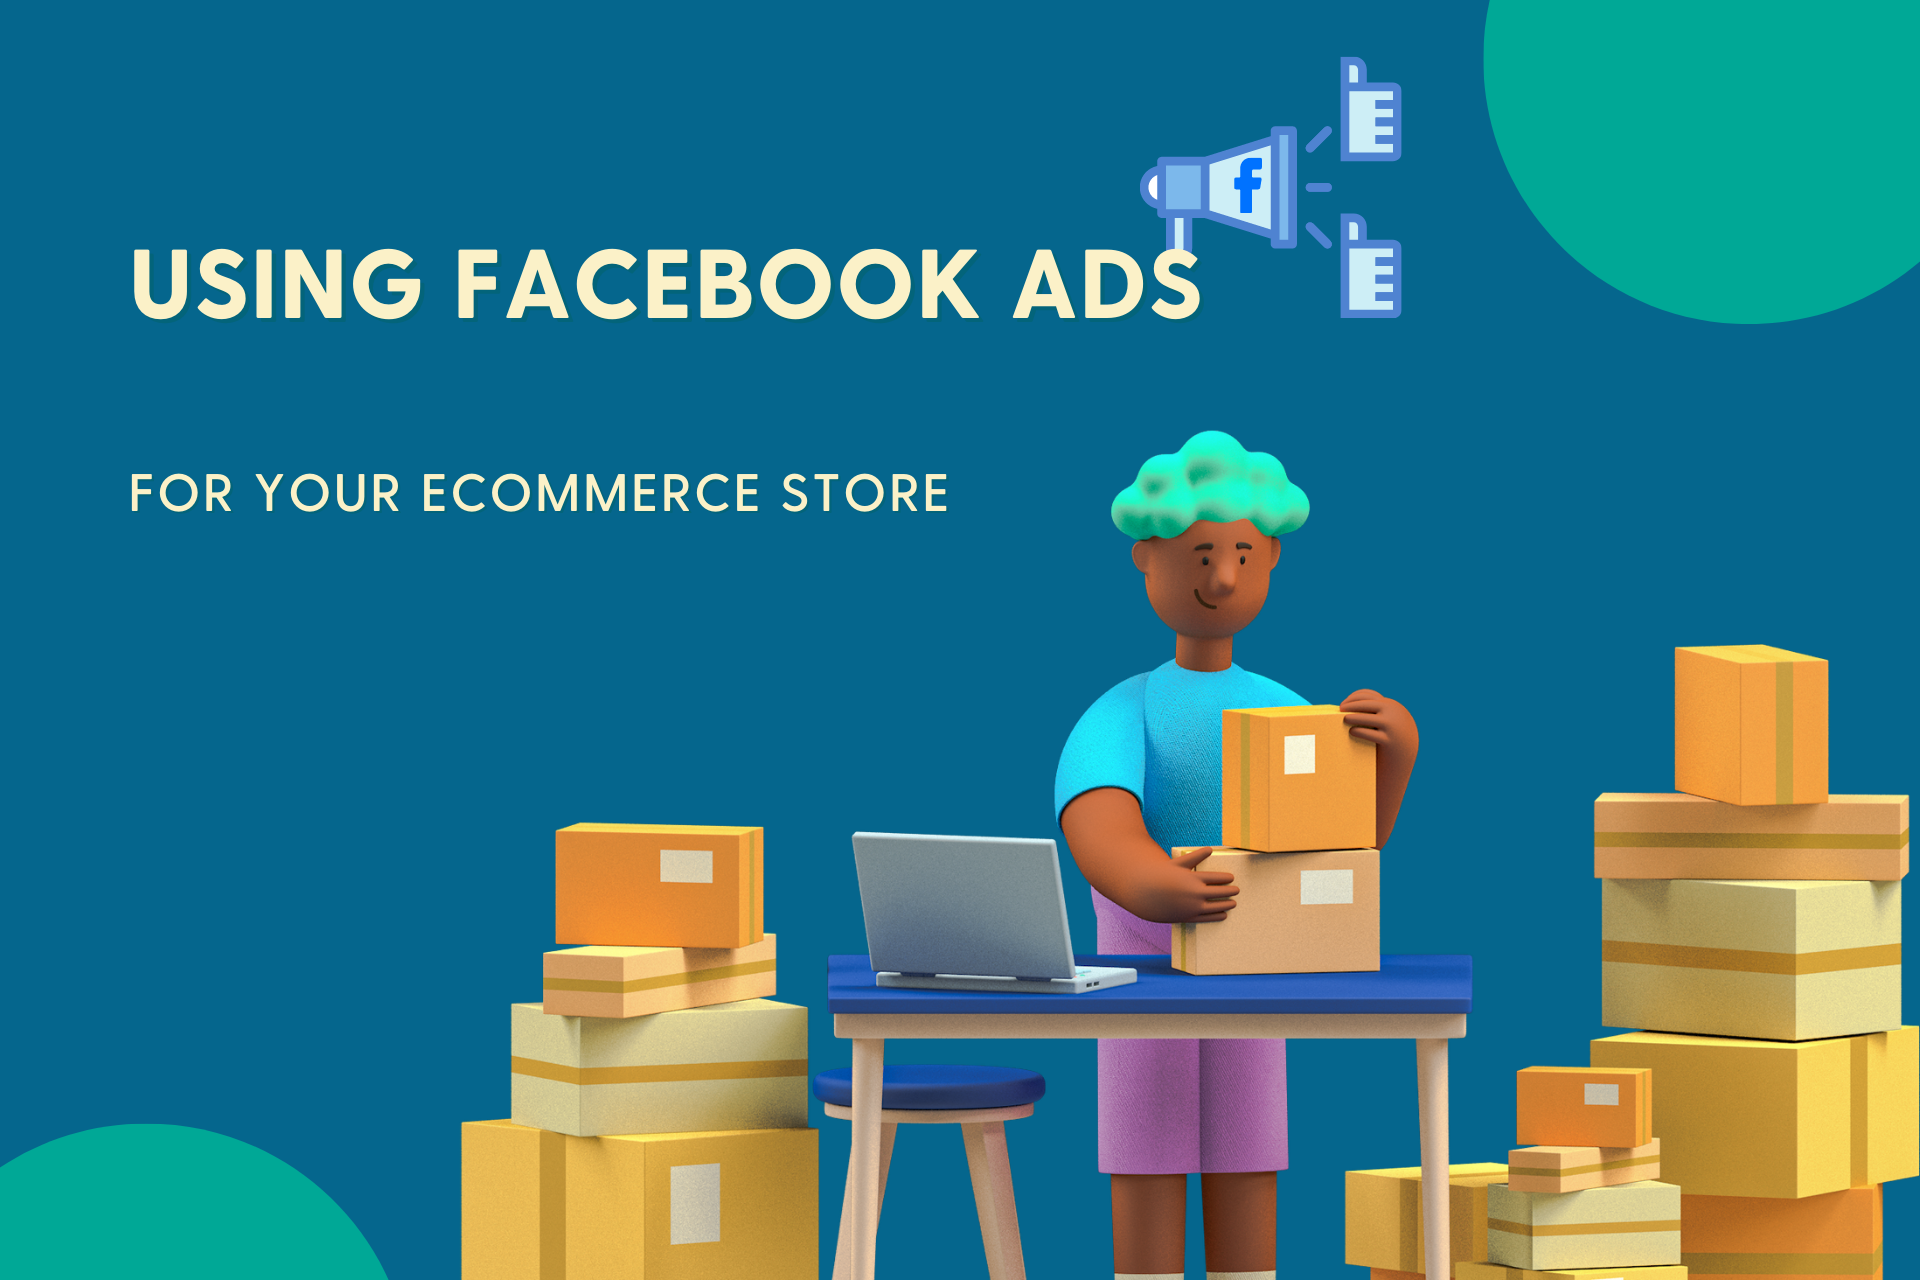 How you can use Facebook ads for Ecommerce Store?